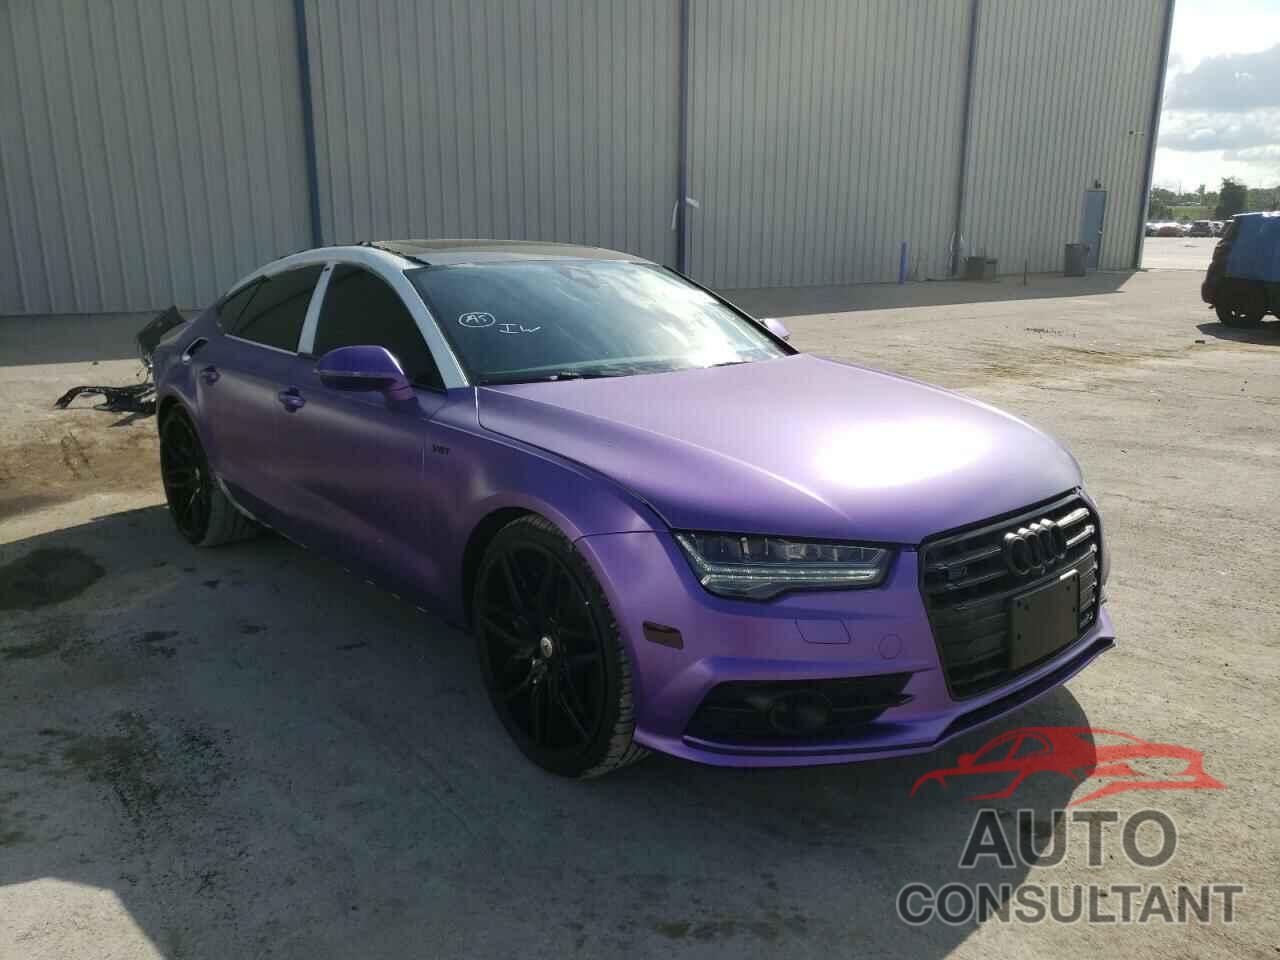 AUDI S7/RS7 2016 - WAUW2AFC5GN195924